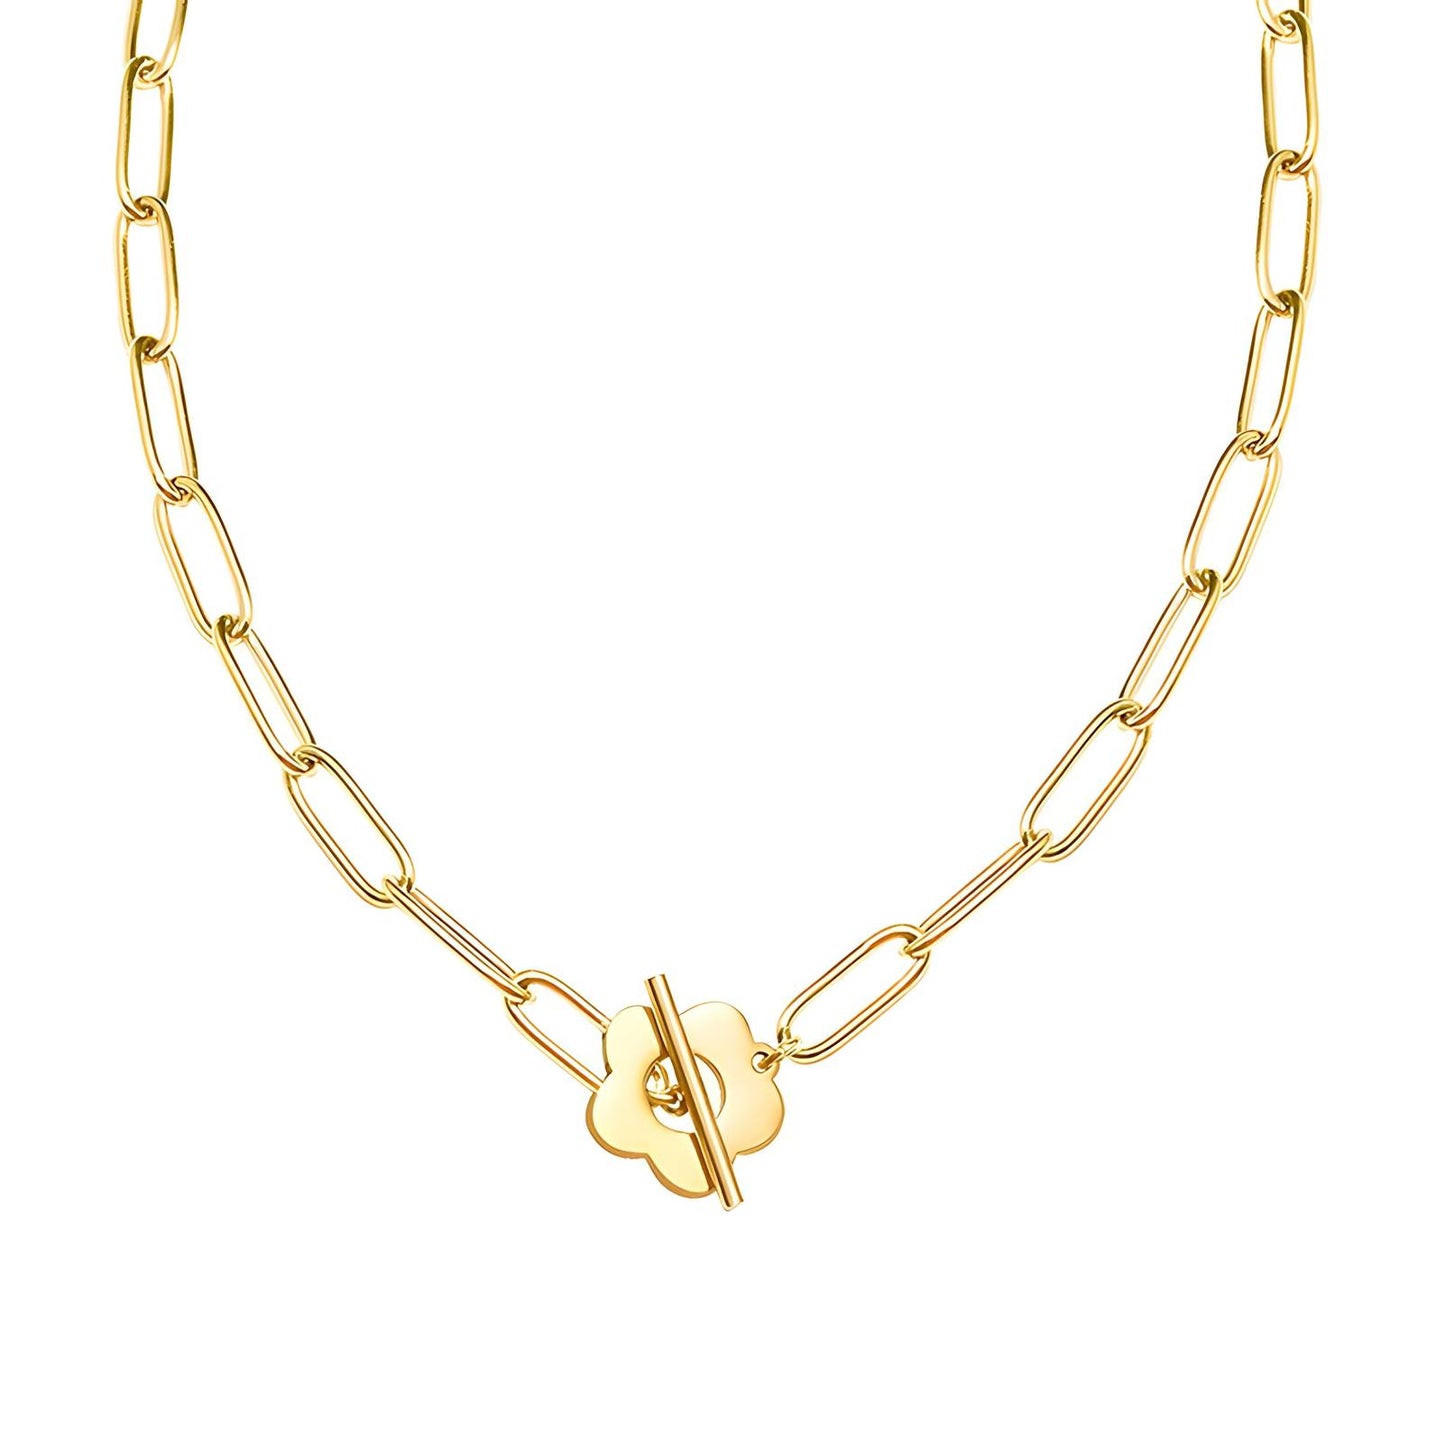 18K GOLD PLATED STAINLESS STEEL "FLOWER" NECKLAC